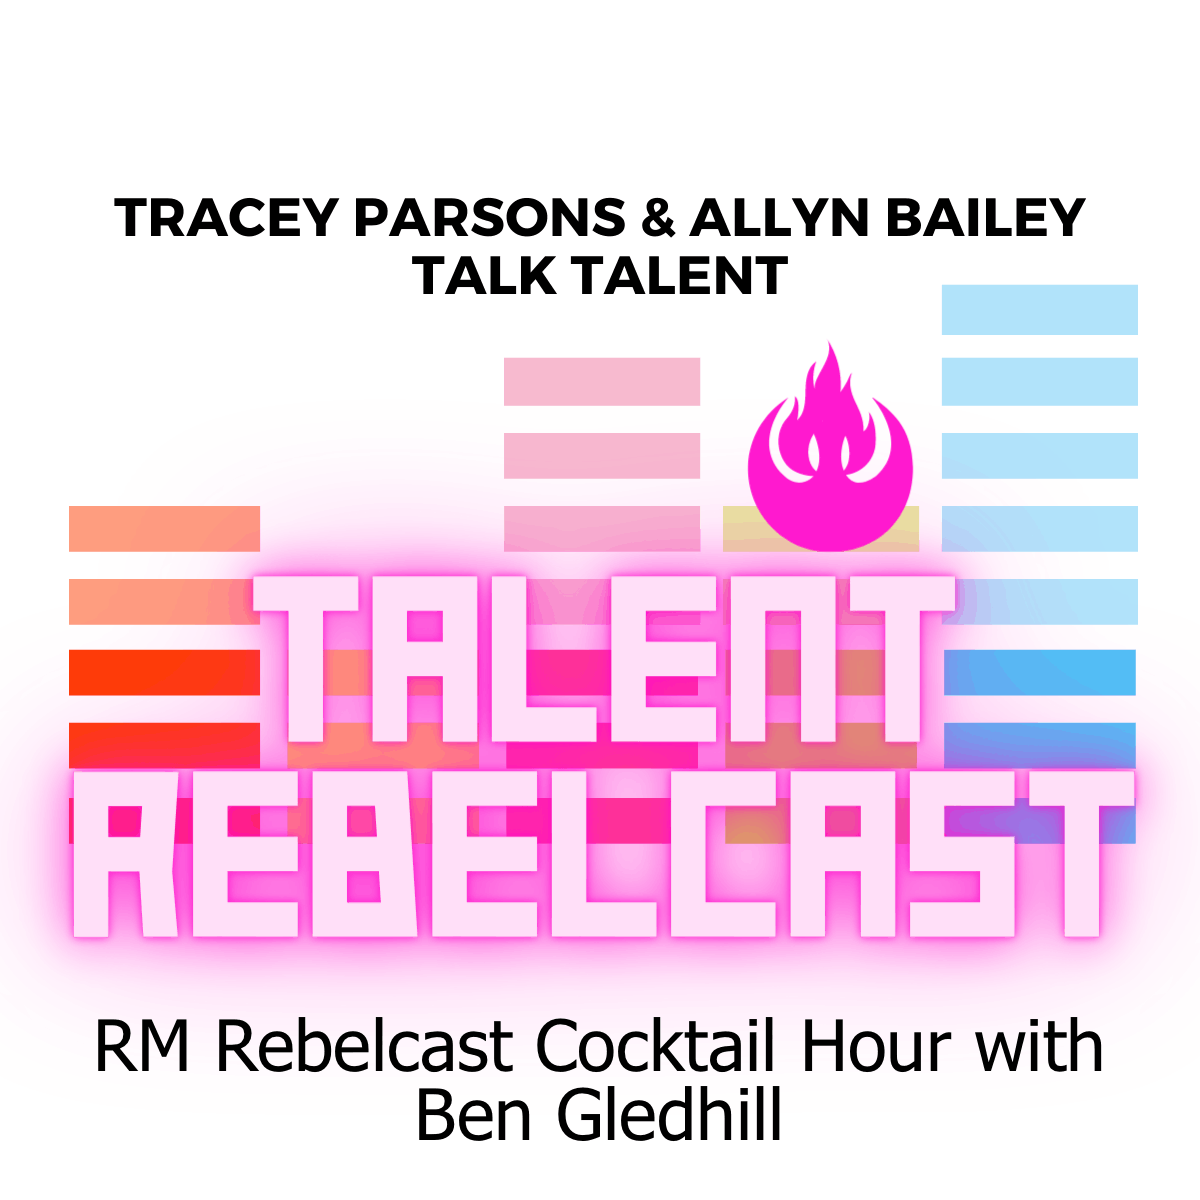 RM Rebelcast Cocktail Hour with Ben Gledhill